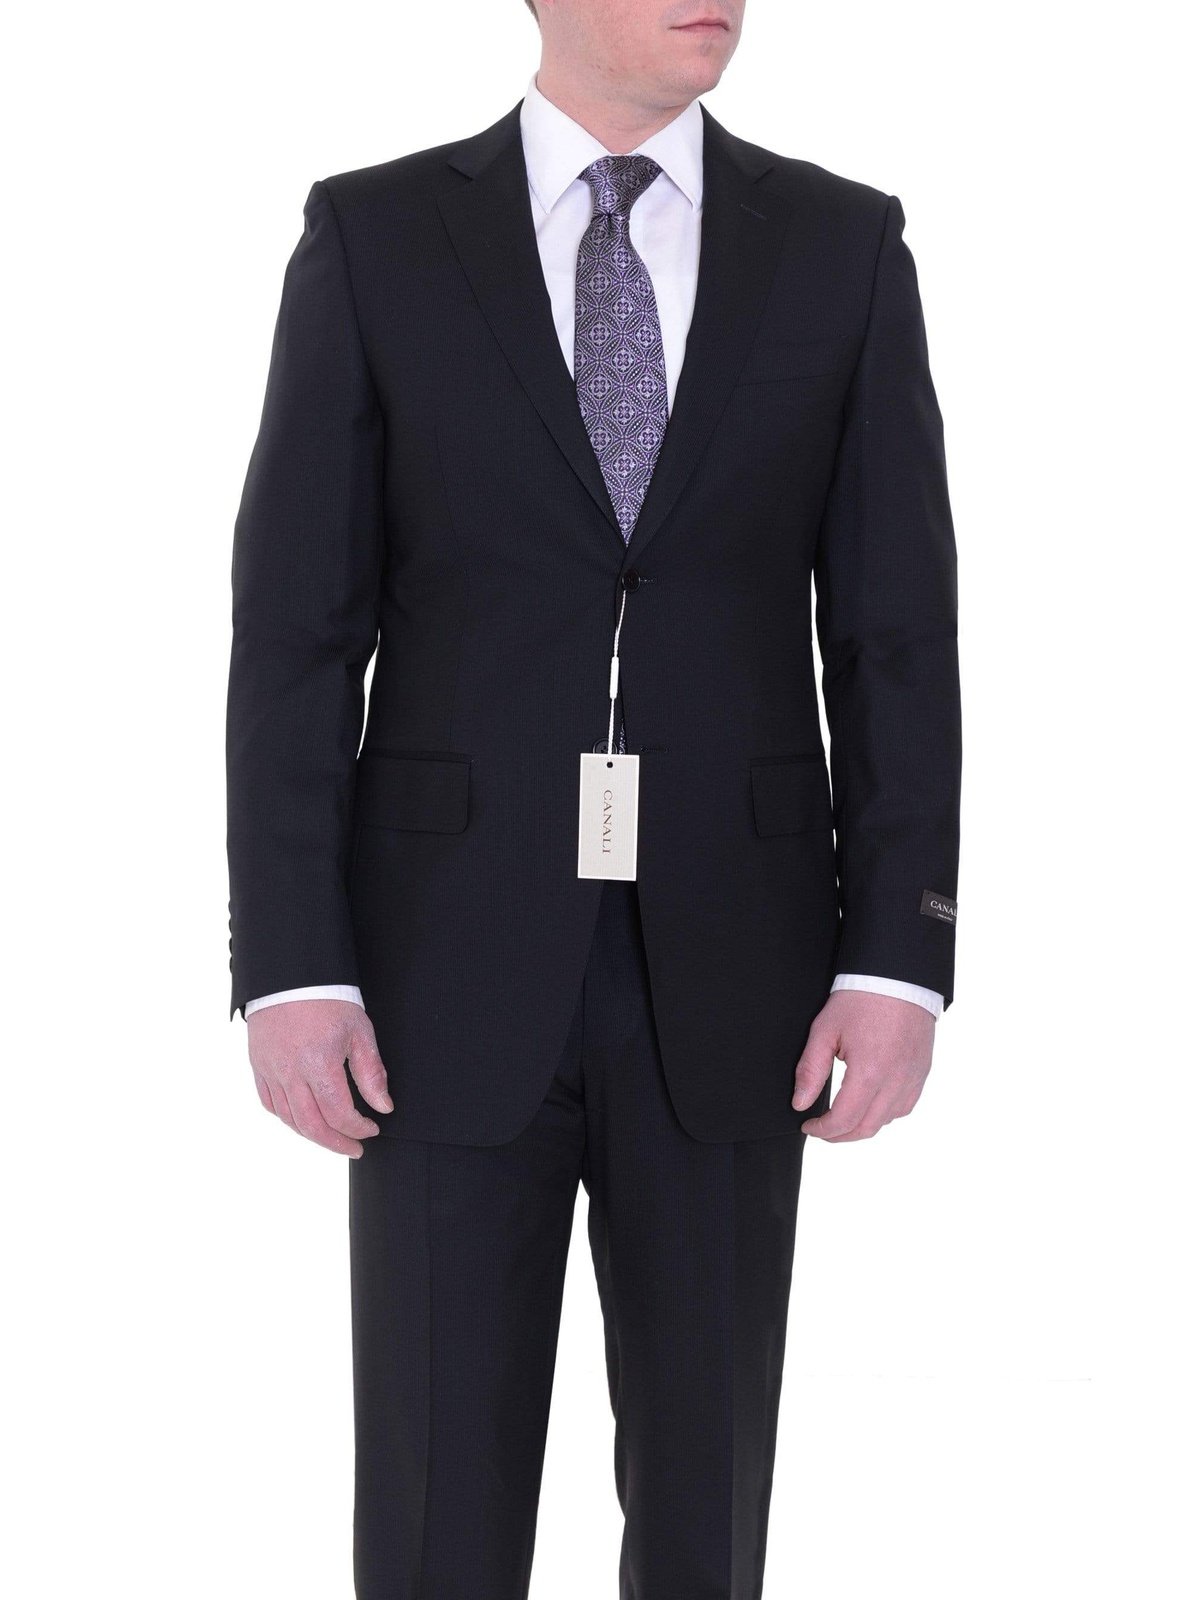 Canali TWO PIECE SUITS Canali Drop 8 Slim Fit 38L 48T Black Striped Two Button Wool Suit